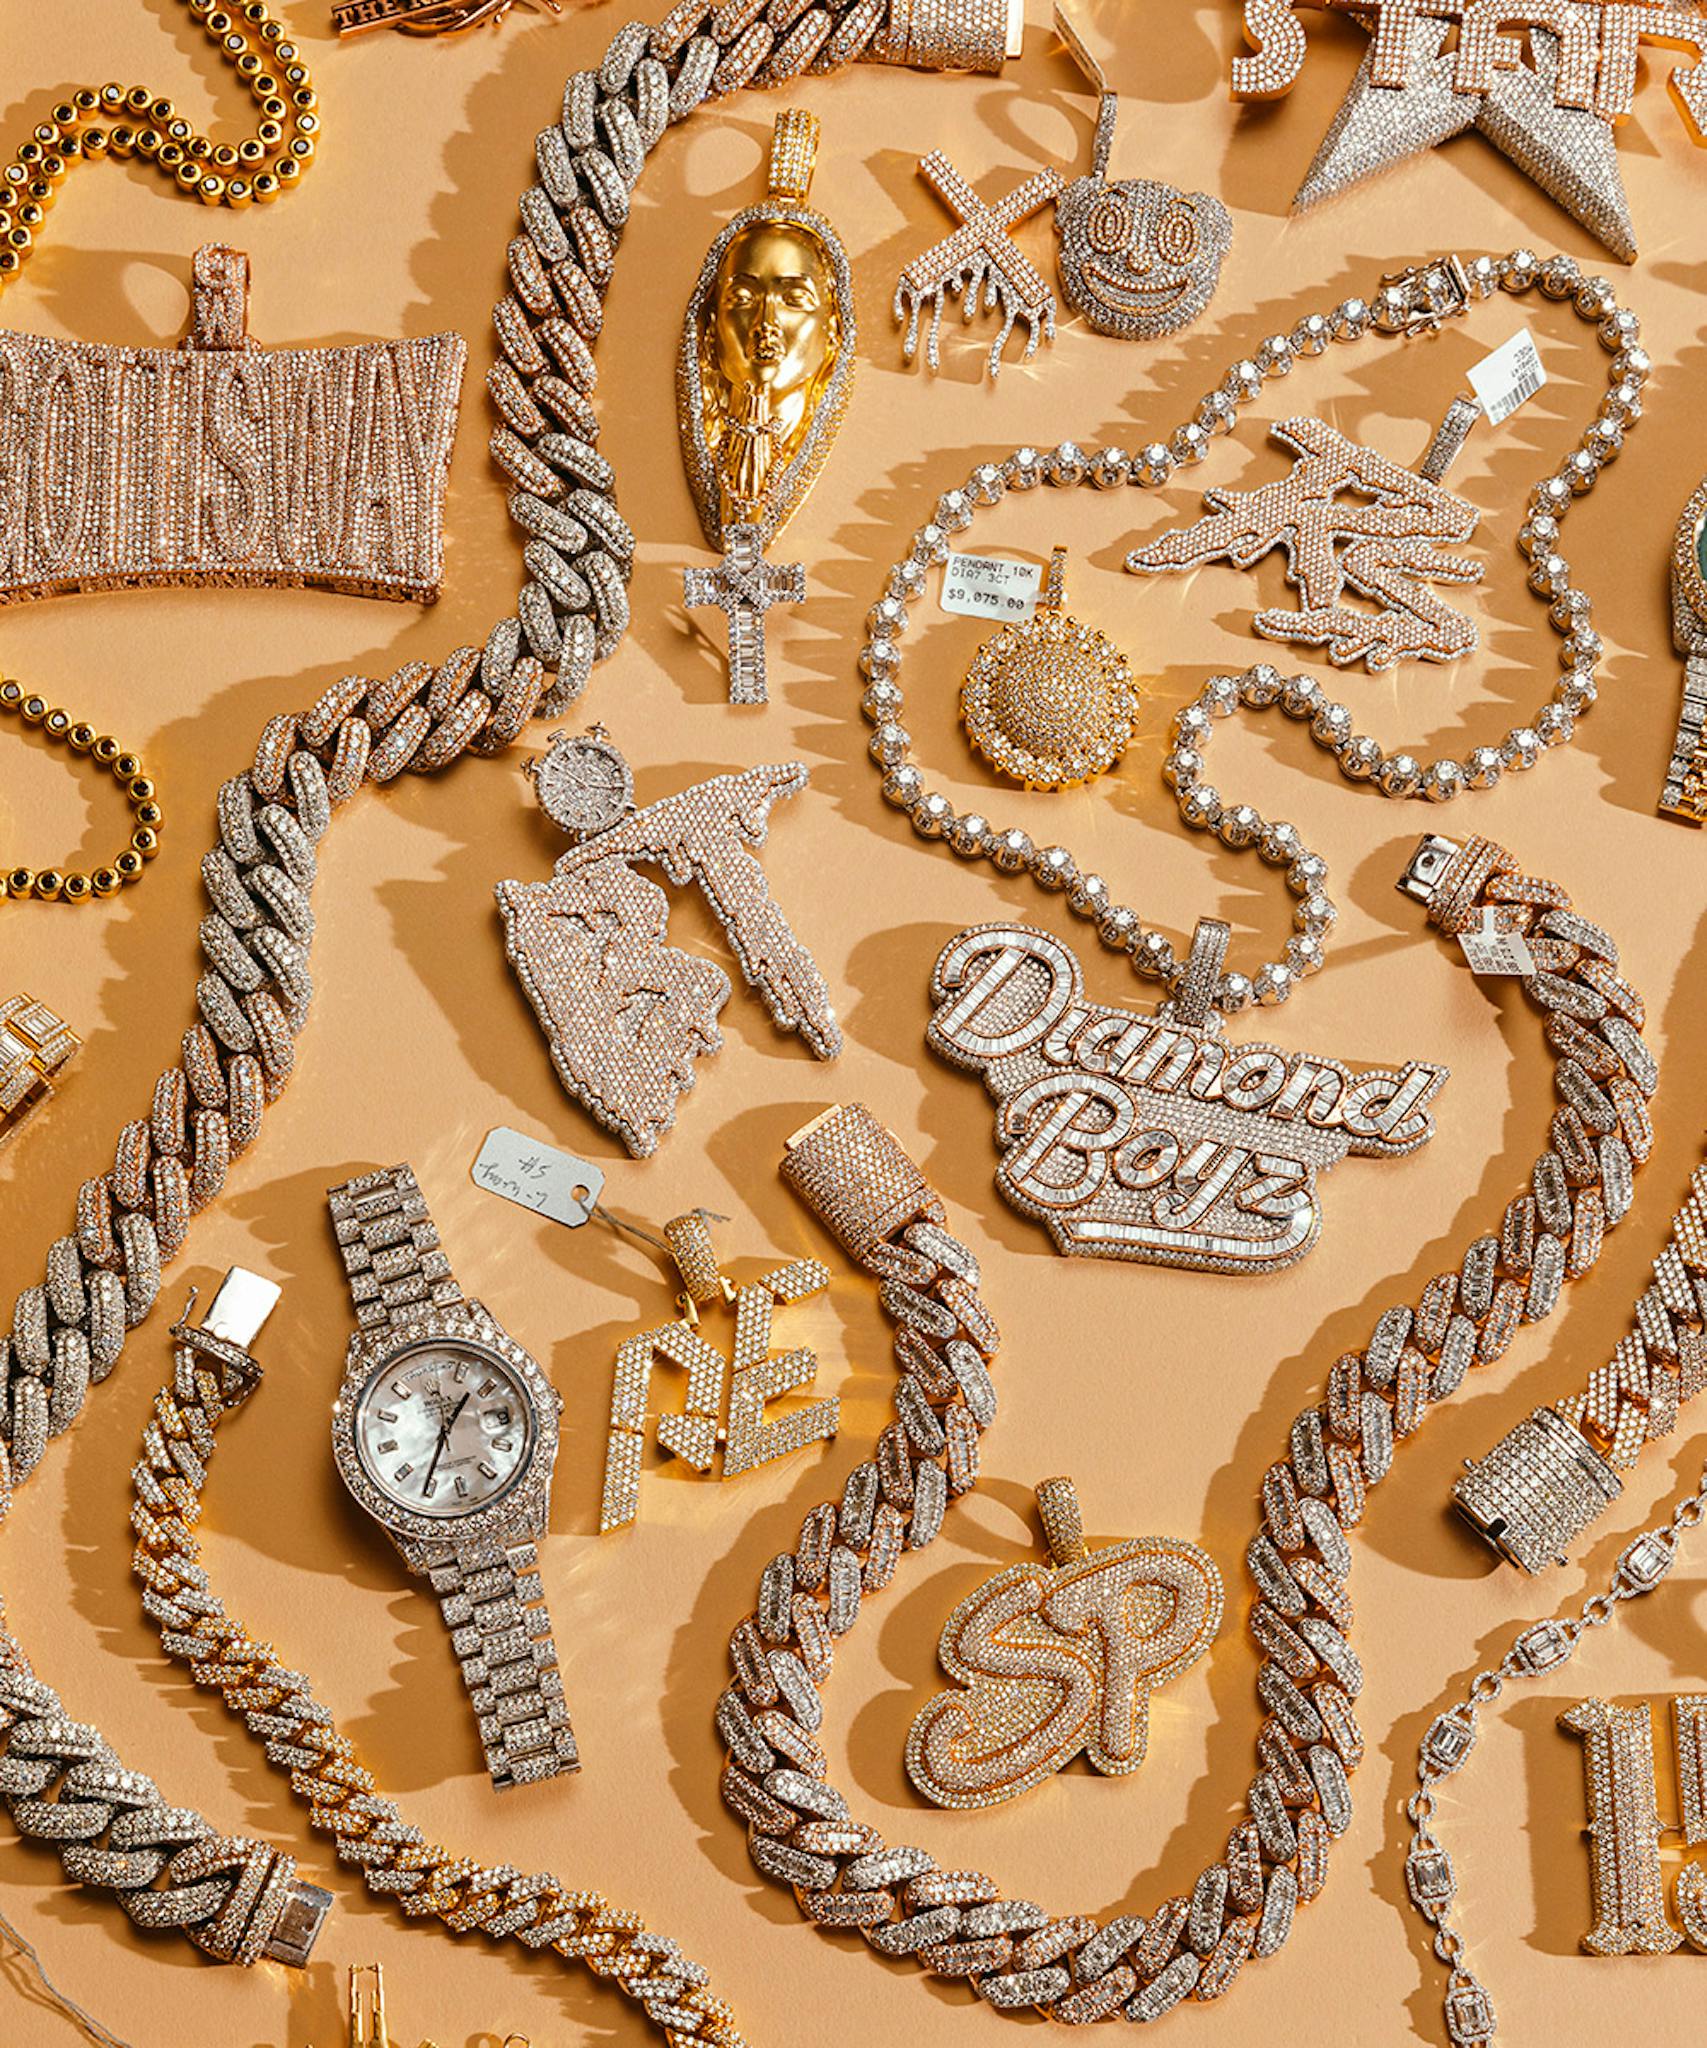 Johnny Dang chains, pieces, and watches from a showroom, including his Diamond Boys chain.